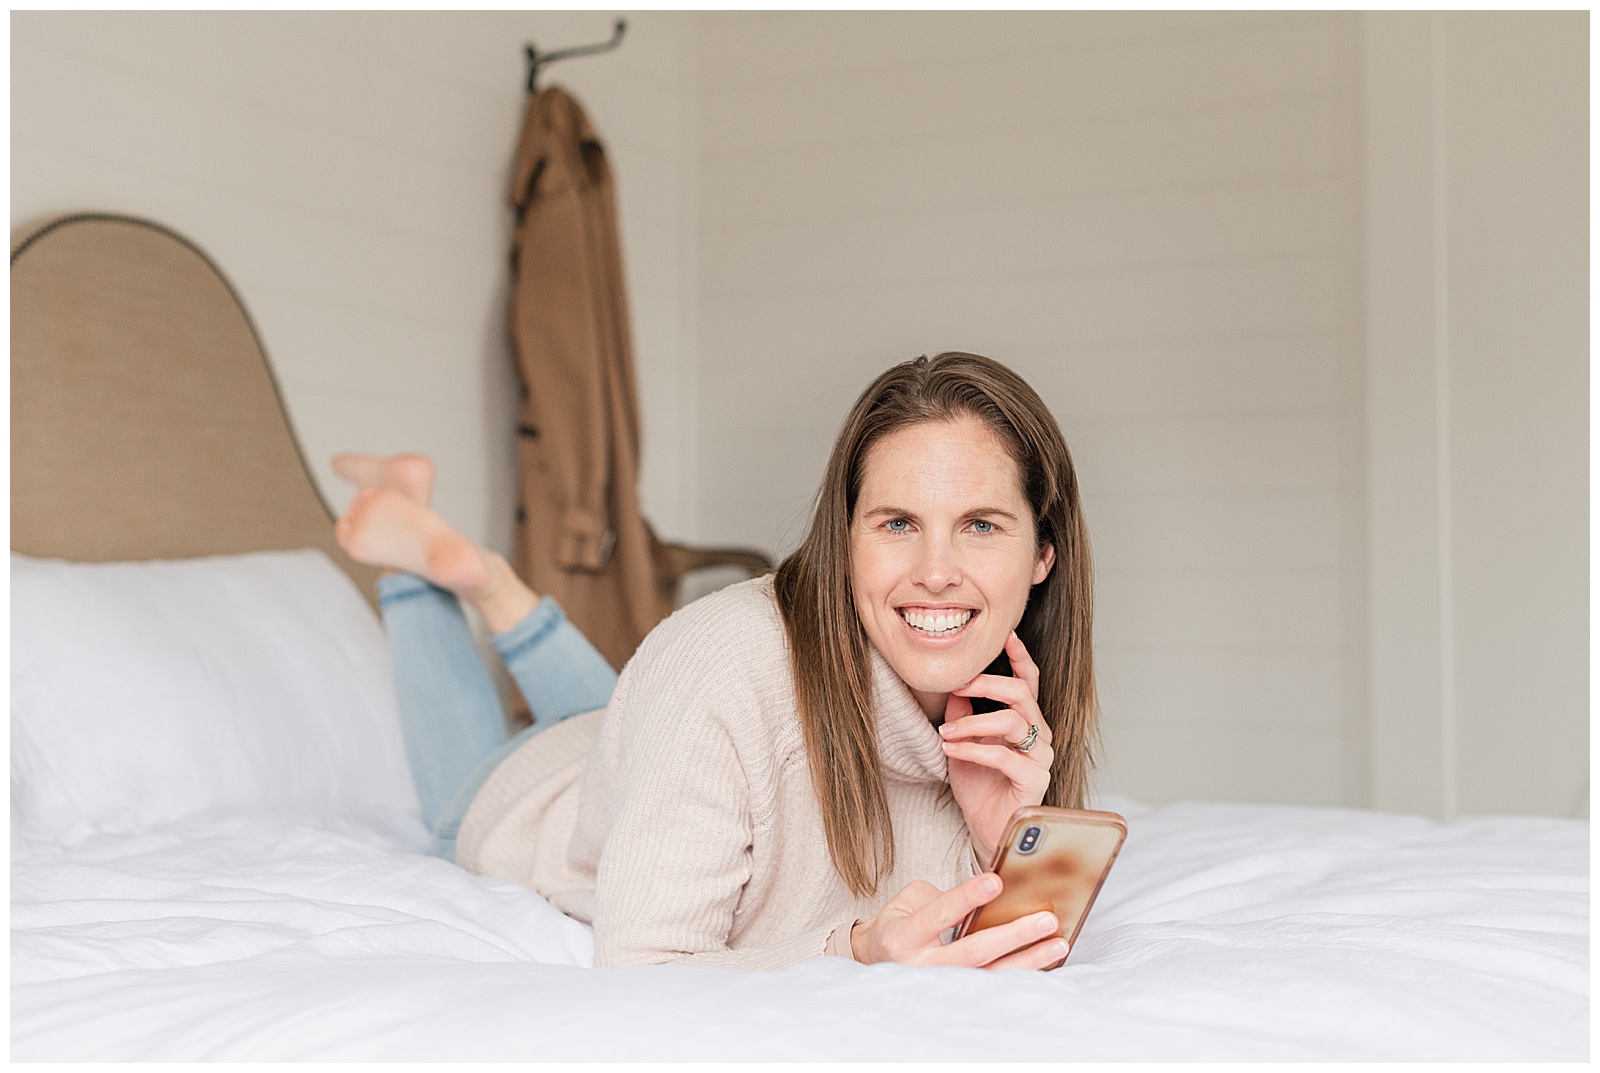 Relaxed lifestyle business headshot checking phone